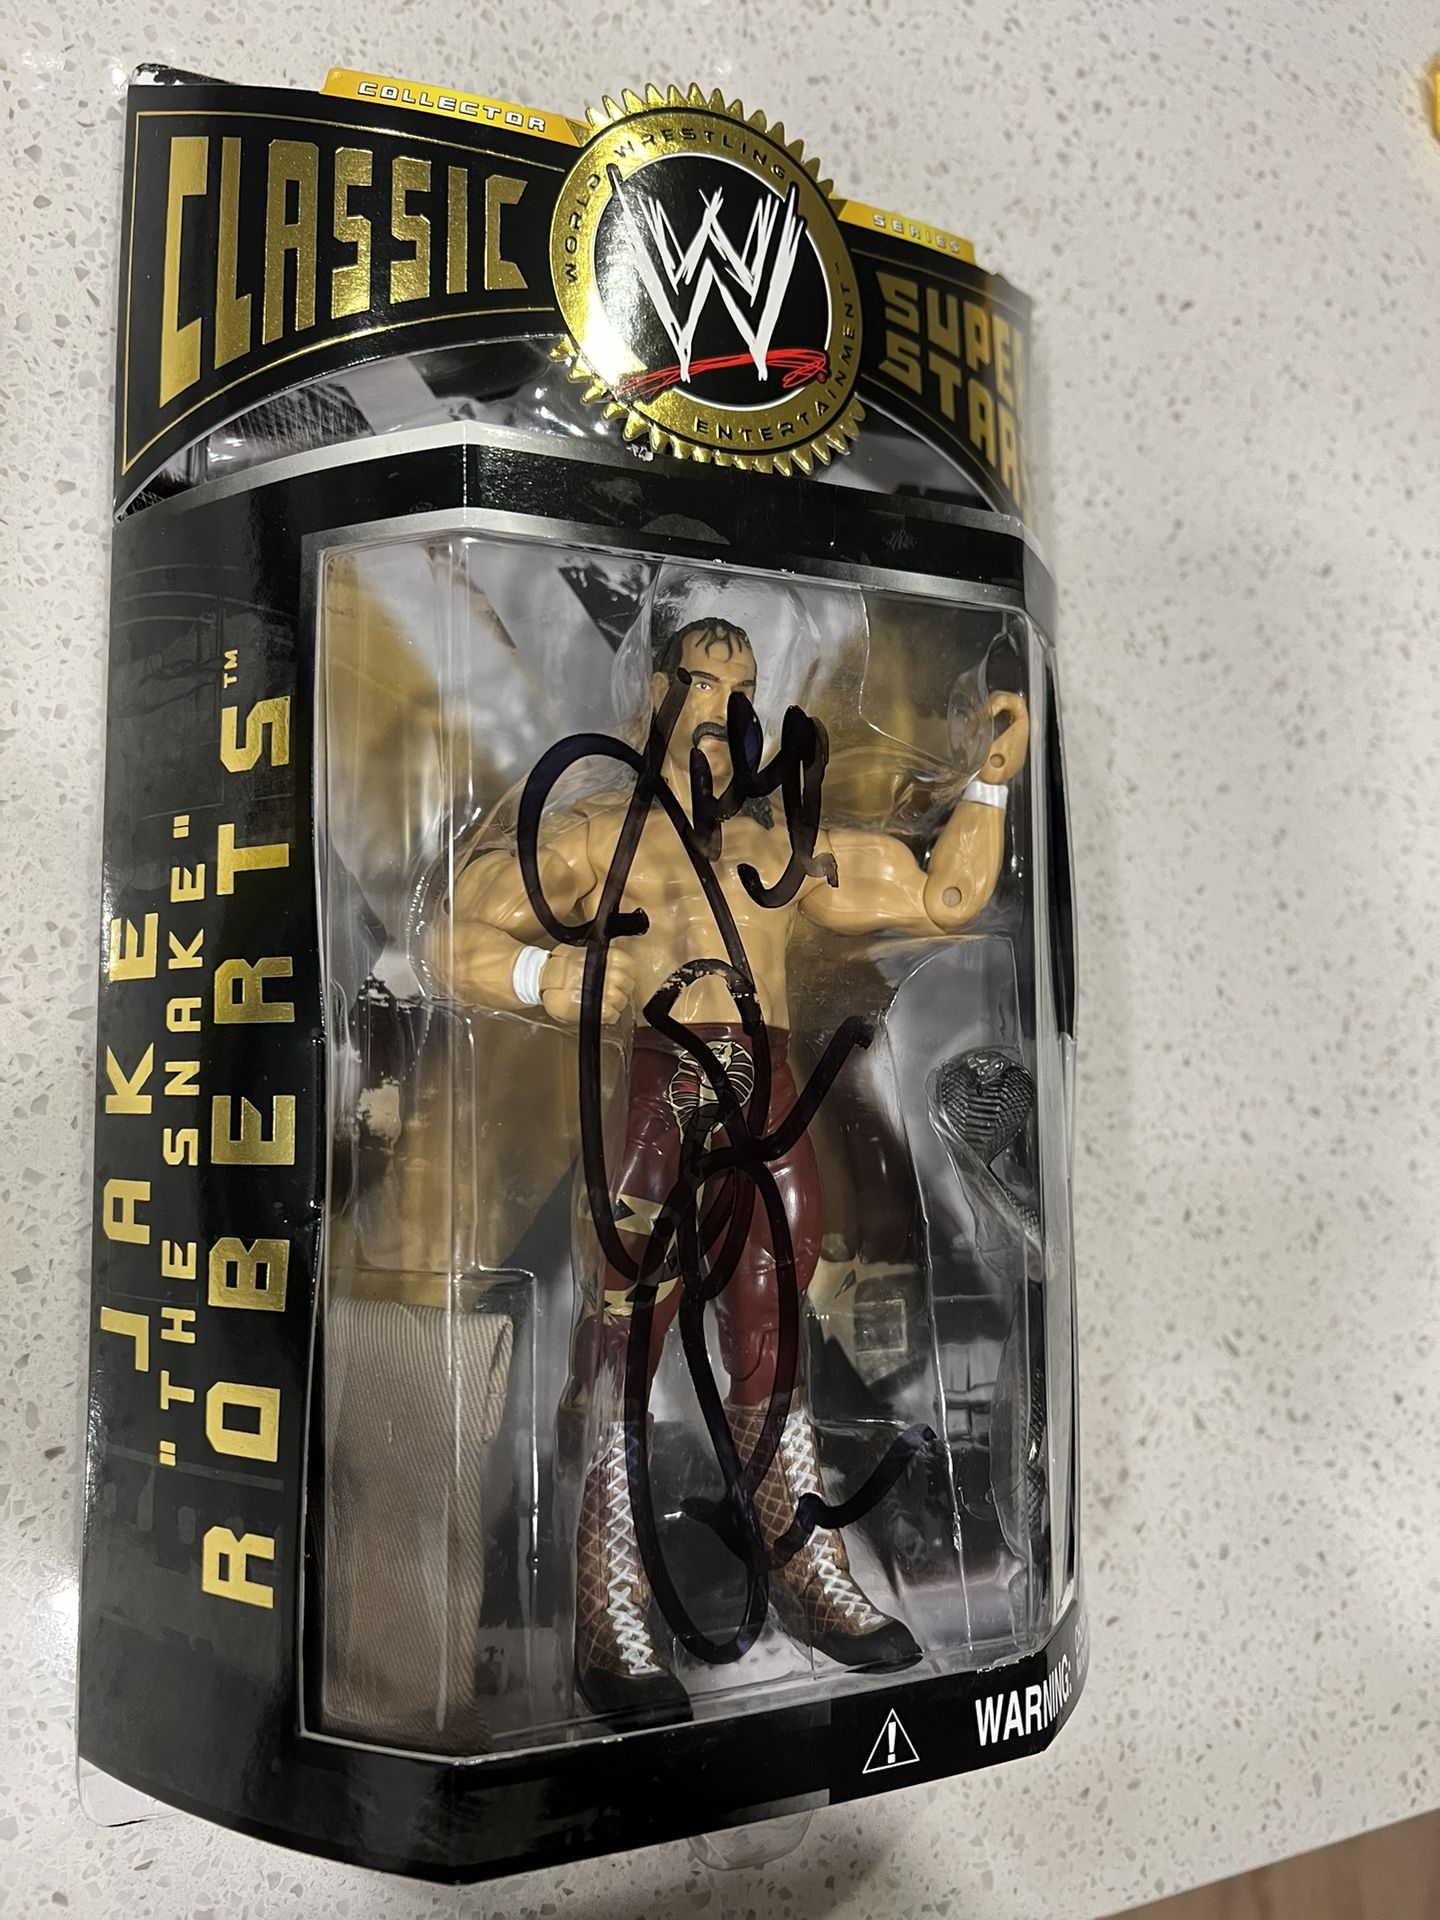 Autographed Classic super Stars Action figure “Jake the snake ”